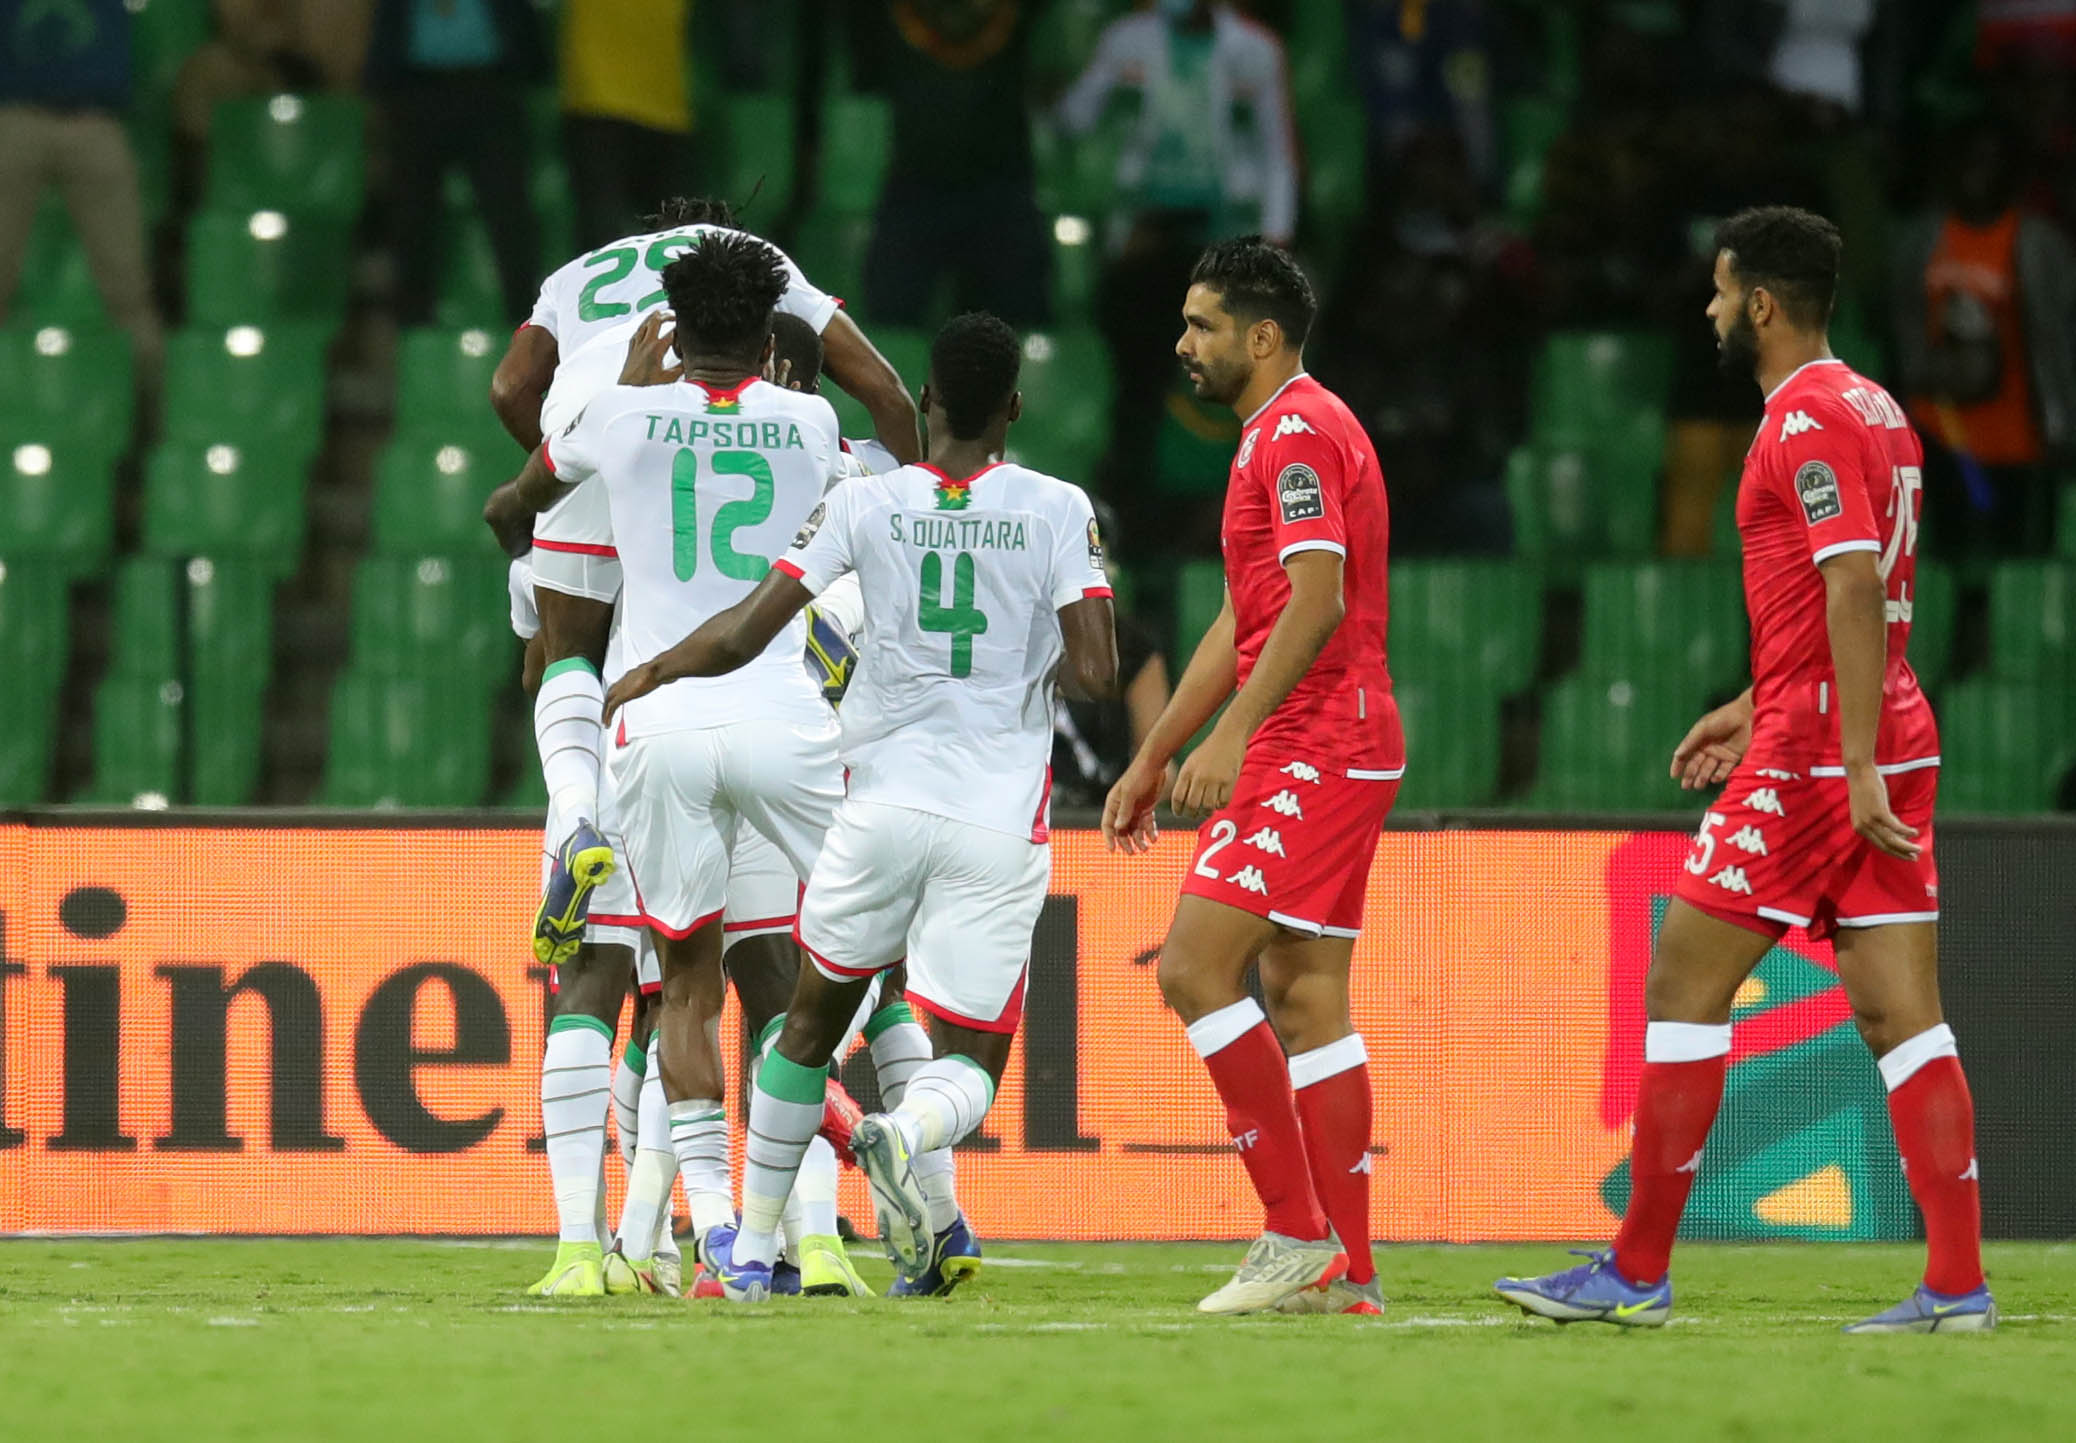 AFCON 2021: Tunisia ouster should spark regret for Super Eagles, not glee thumbnail